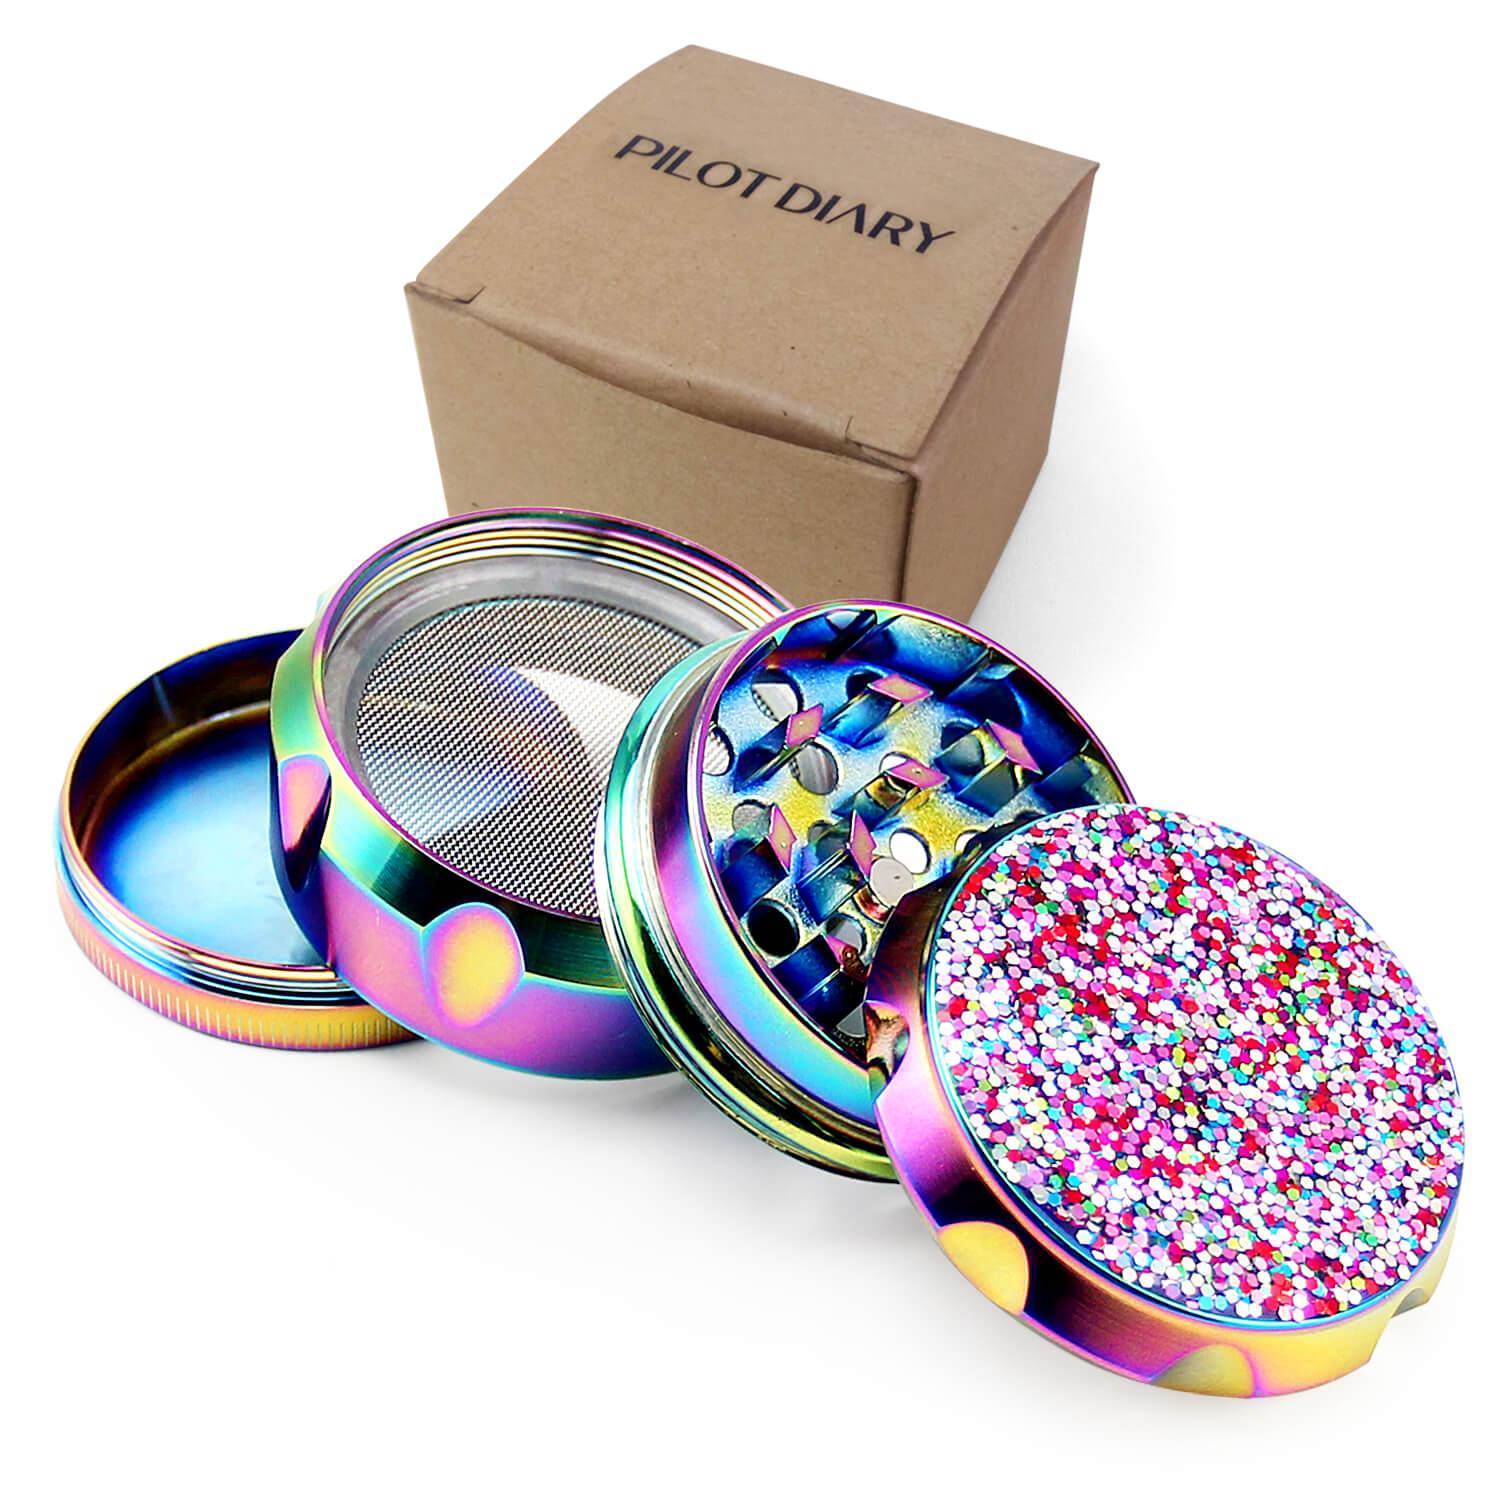 Girly Weed Grinder - PILOT DIARY